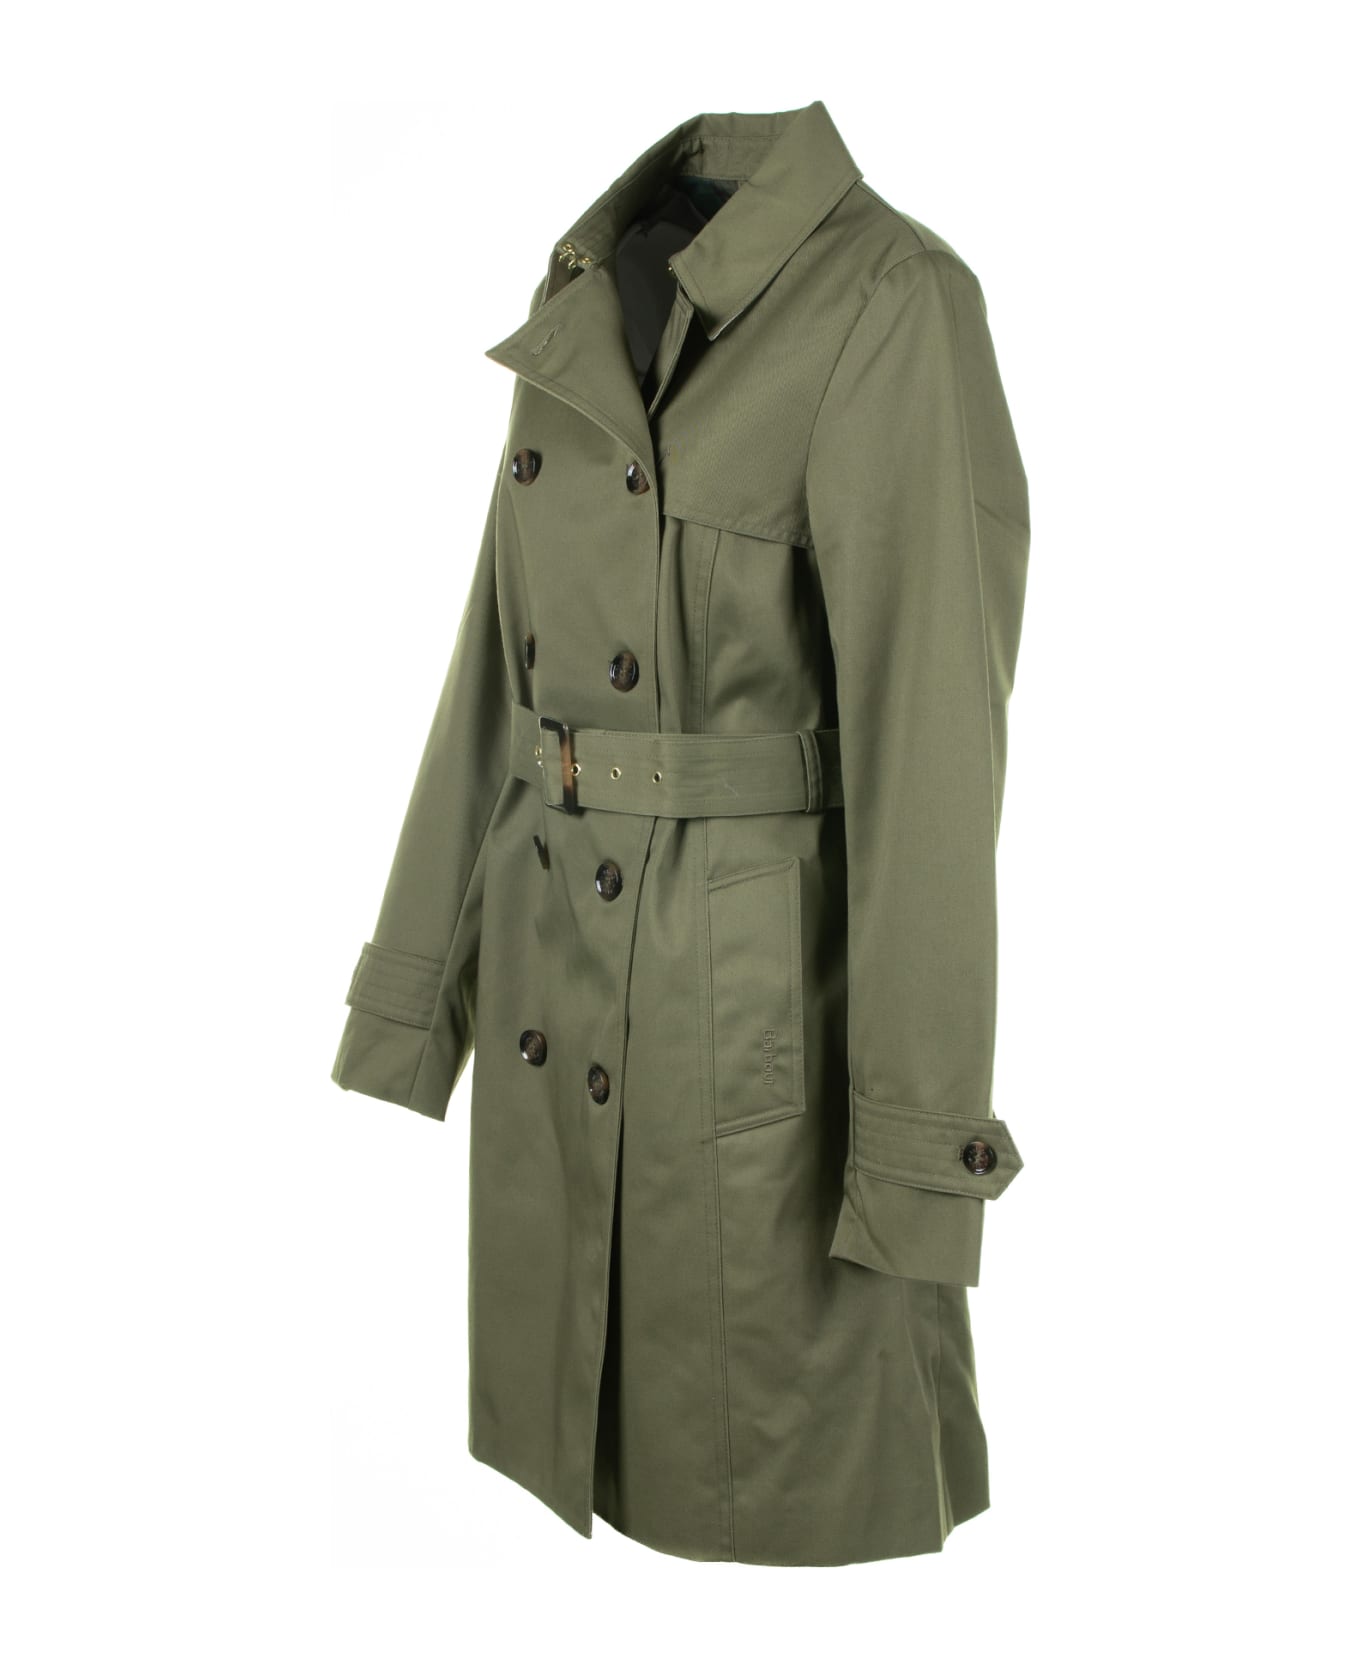 Barbour Green Waterproof Twill Trench Coat - BURNT OLIVE/ANCIENT POLAR